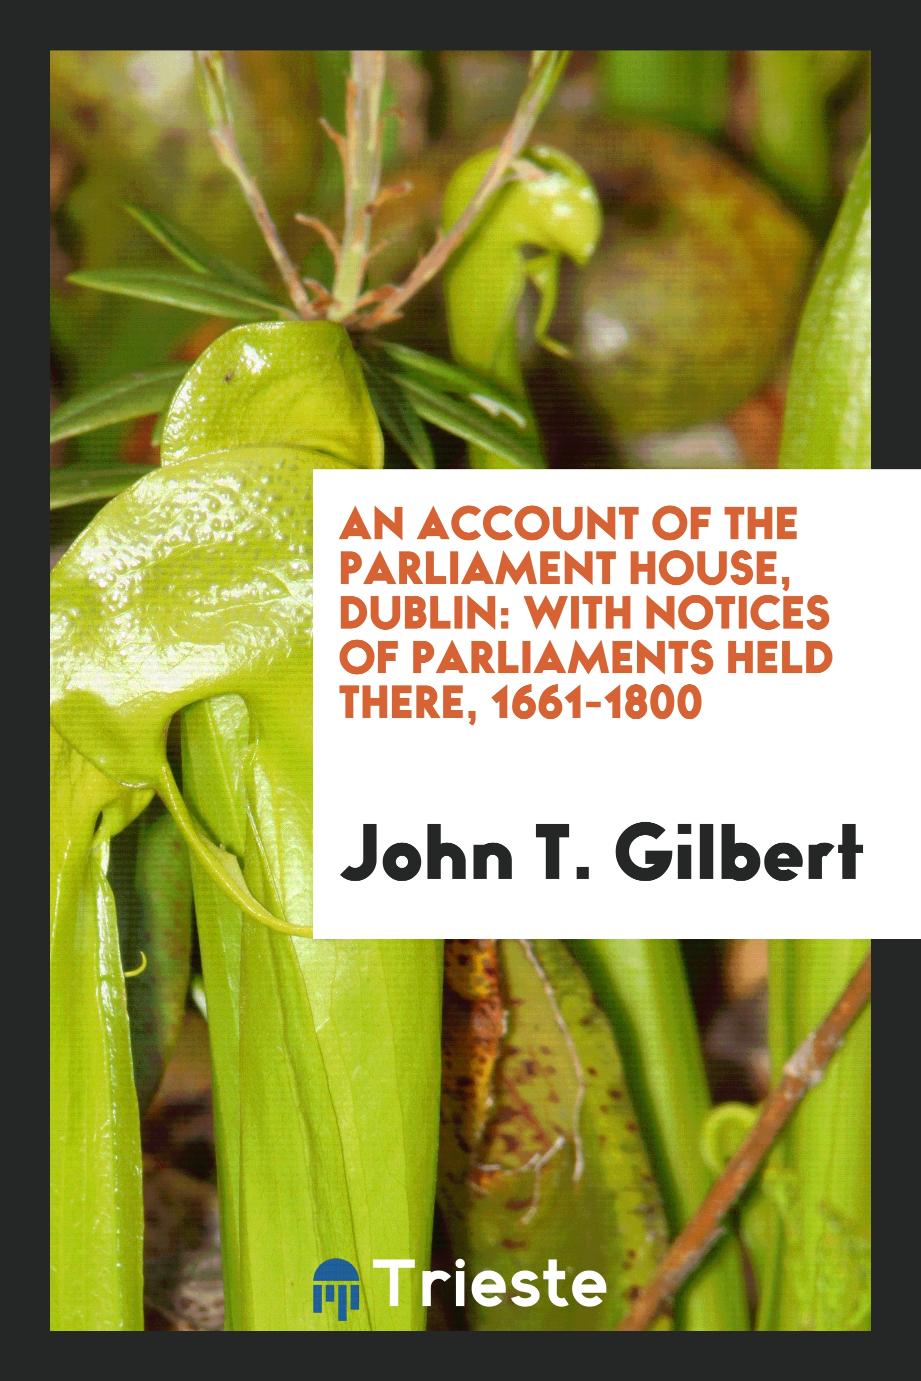 An Account of the Parliament House, Dublin: With Notices of Parliaments Held There, 1661-1800